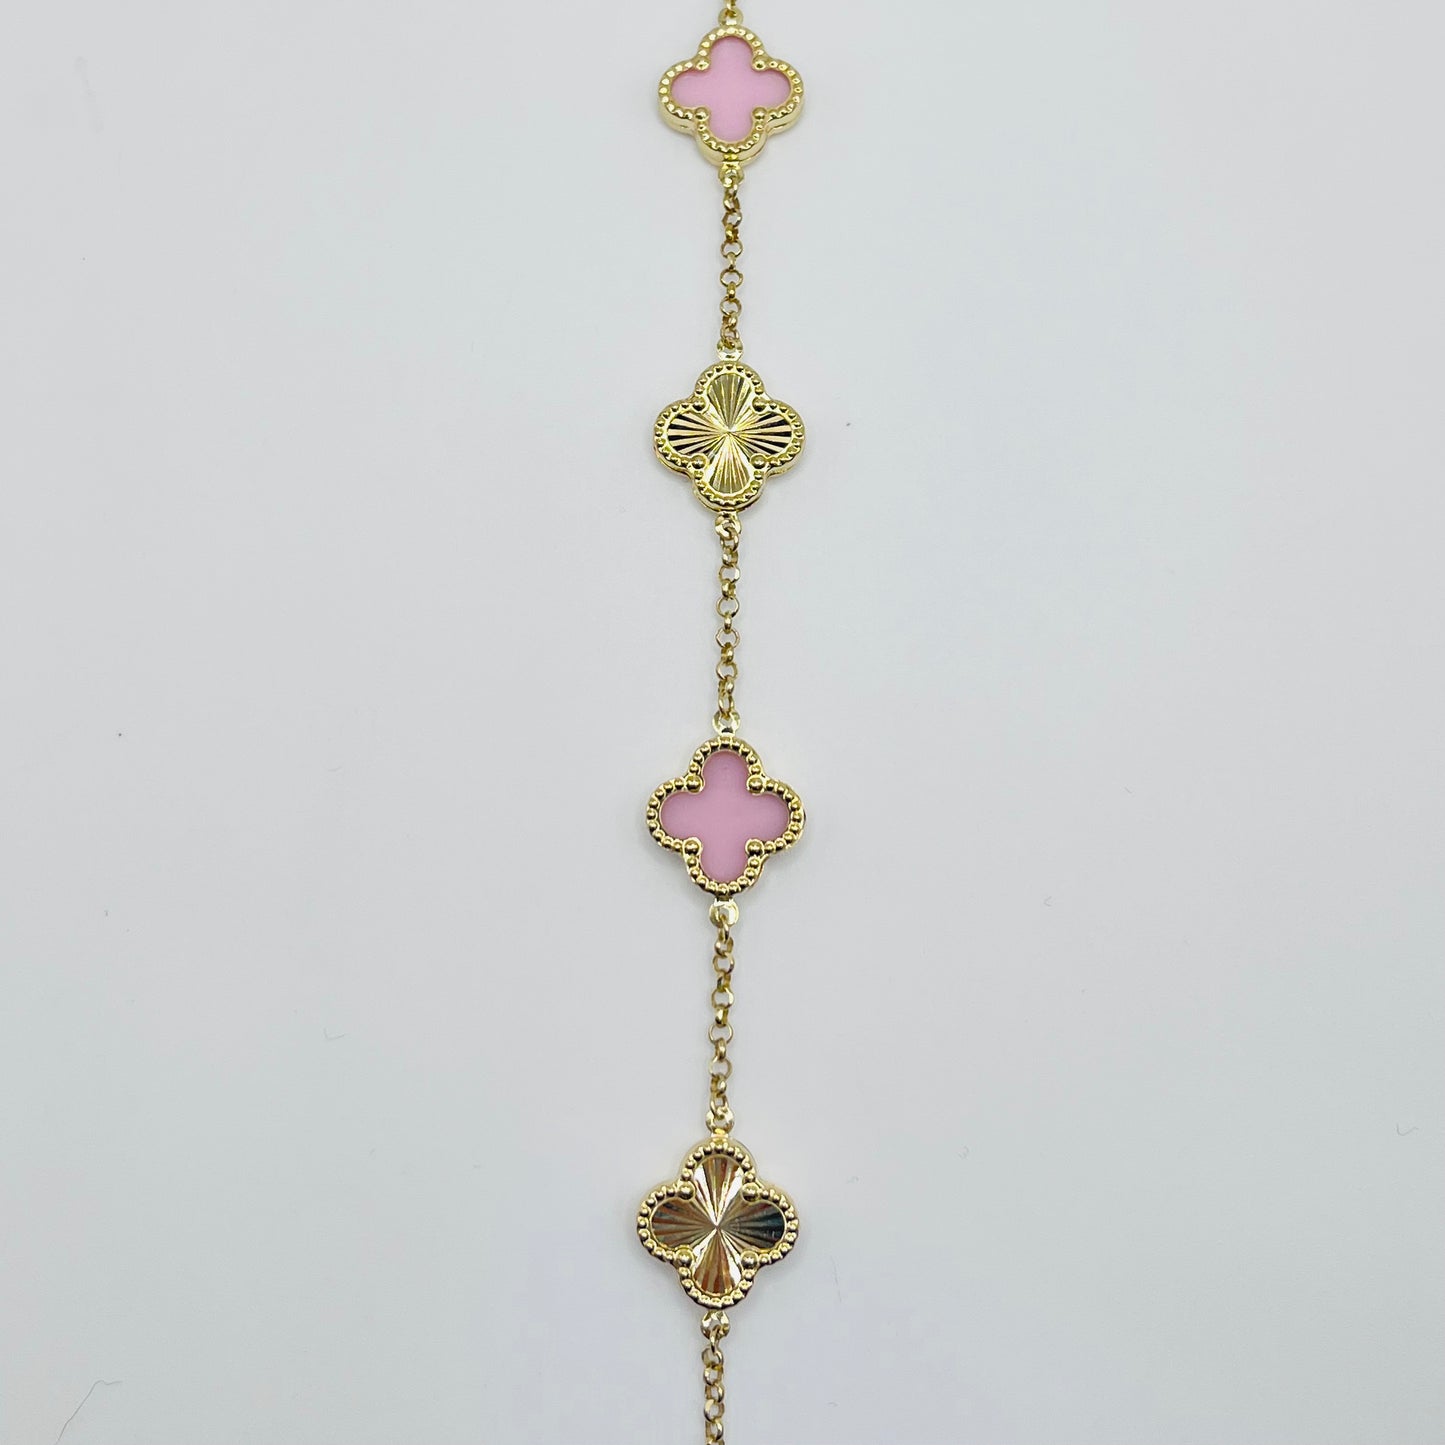 10K Gold Bracelet with Pink and Gold Clovers (7")